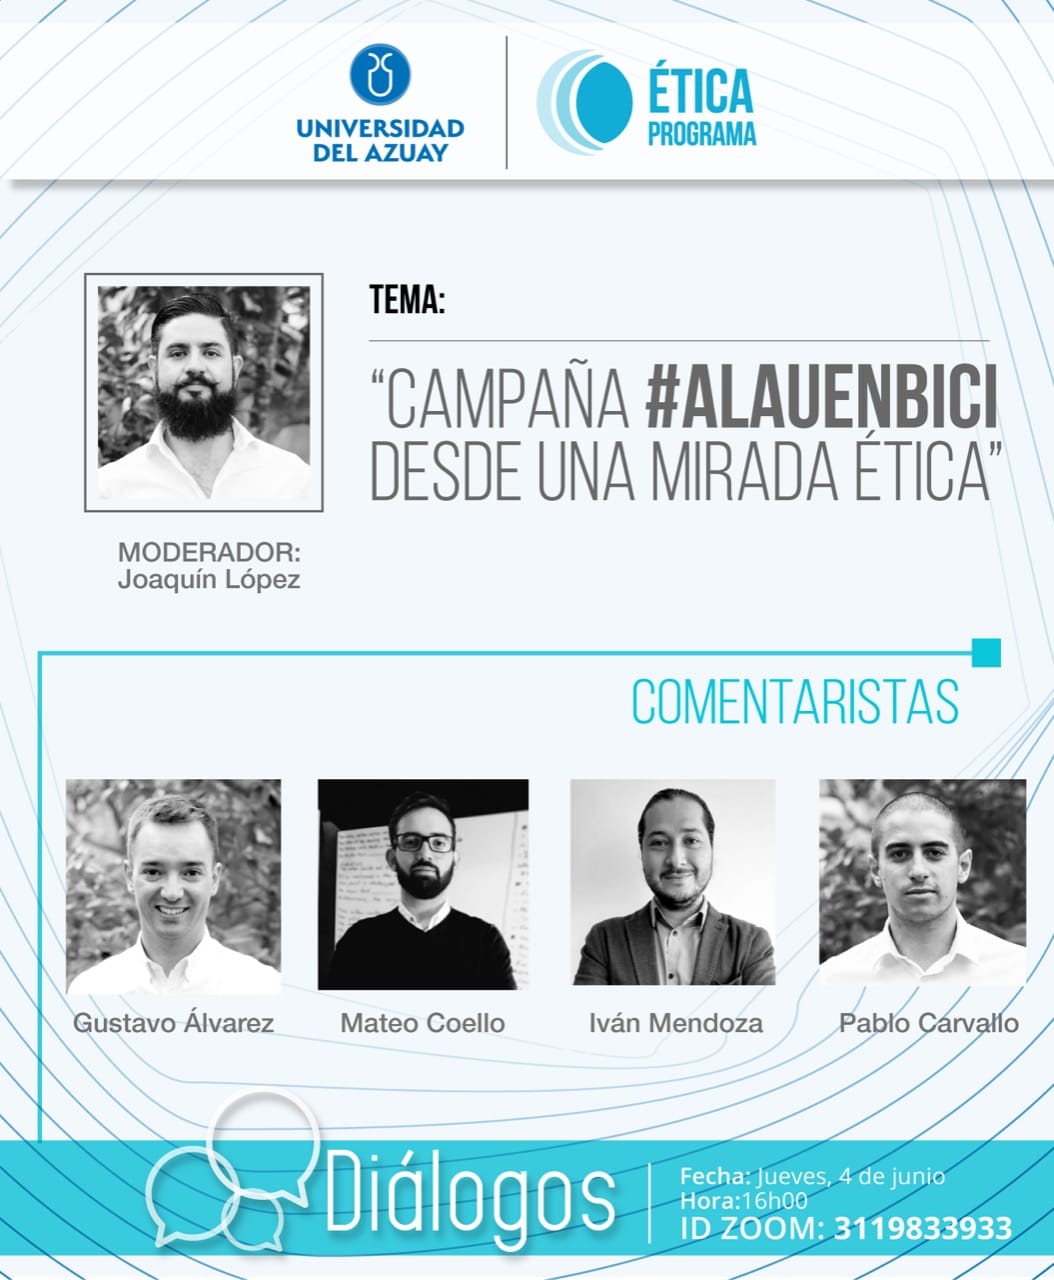 "#Alauenbici campaign from an ethical perspective"